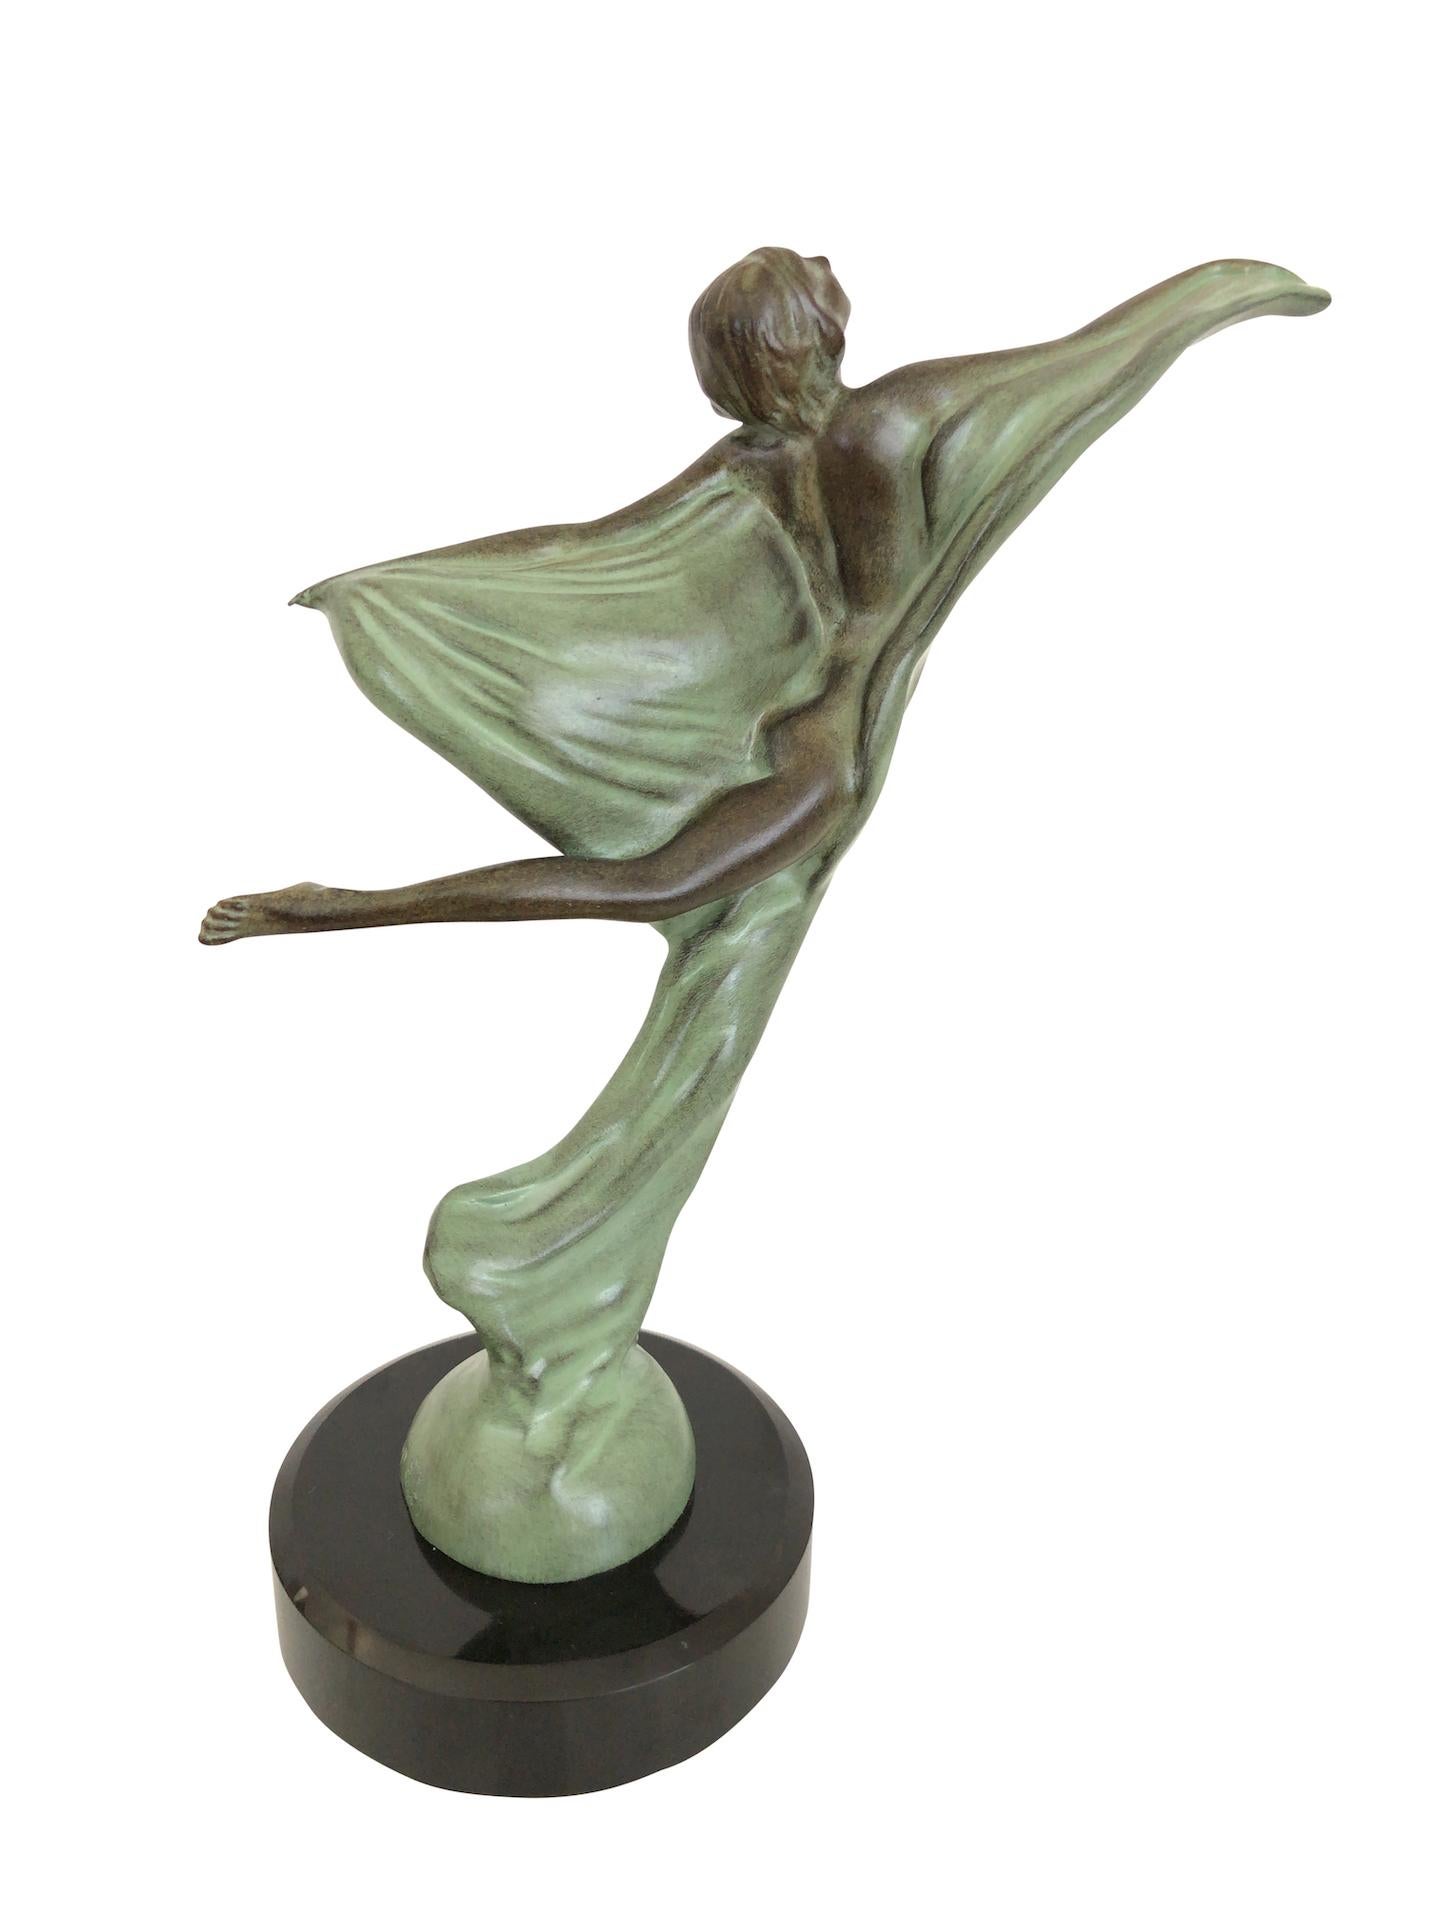 Patinated Sculpture Envol Dancer French Art Deco Style Radiator Mascot from Max Le Verrier